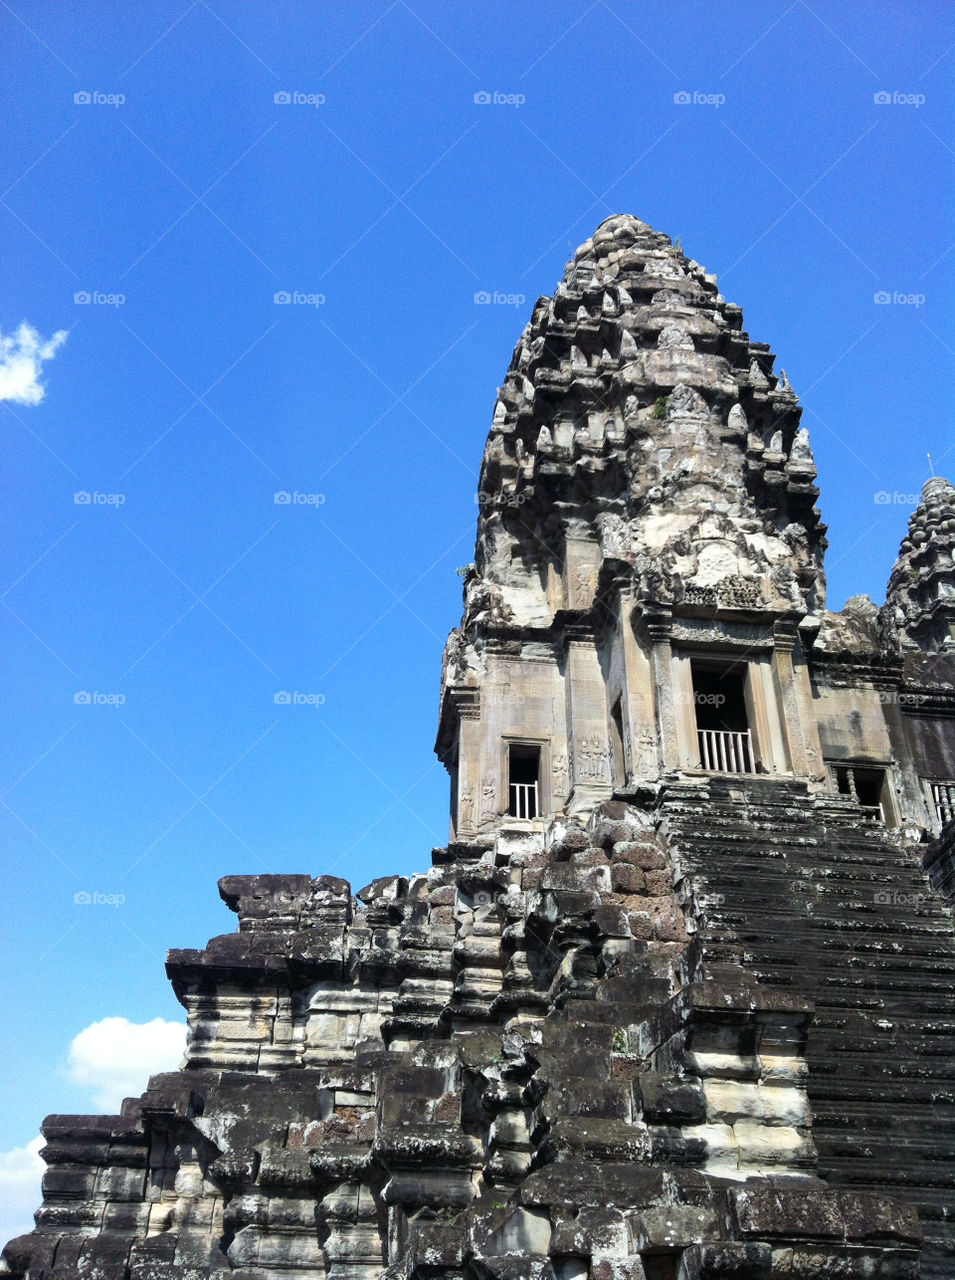 angkor wat cambodia travel asia monument by lawjhao